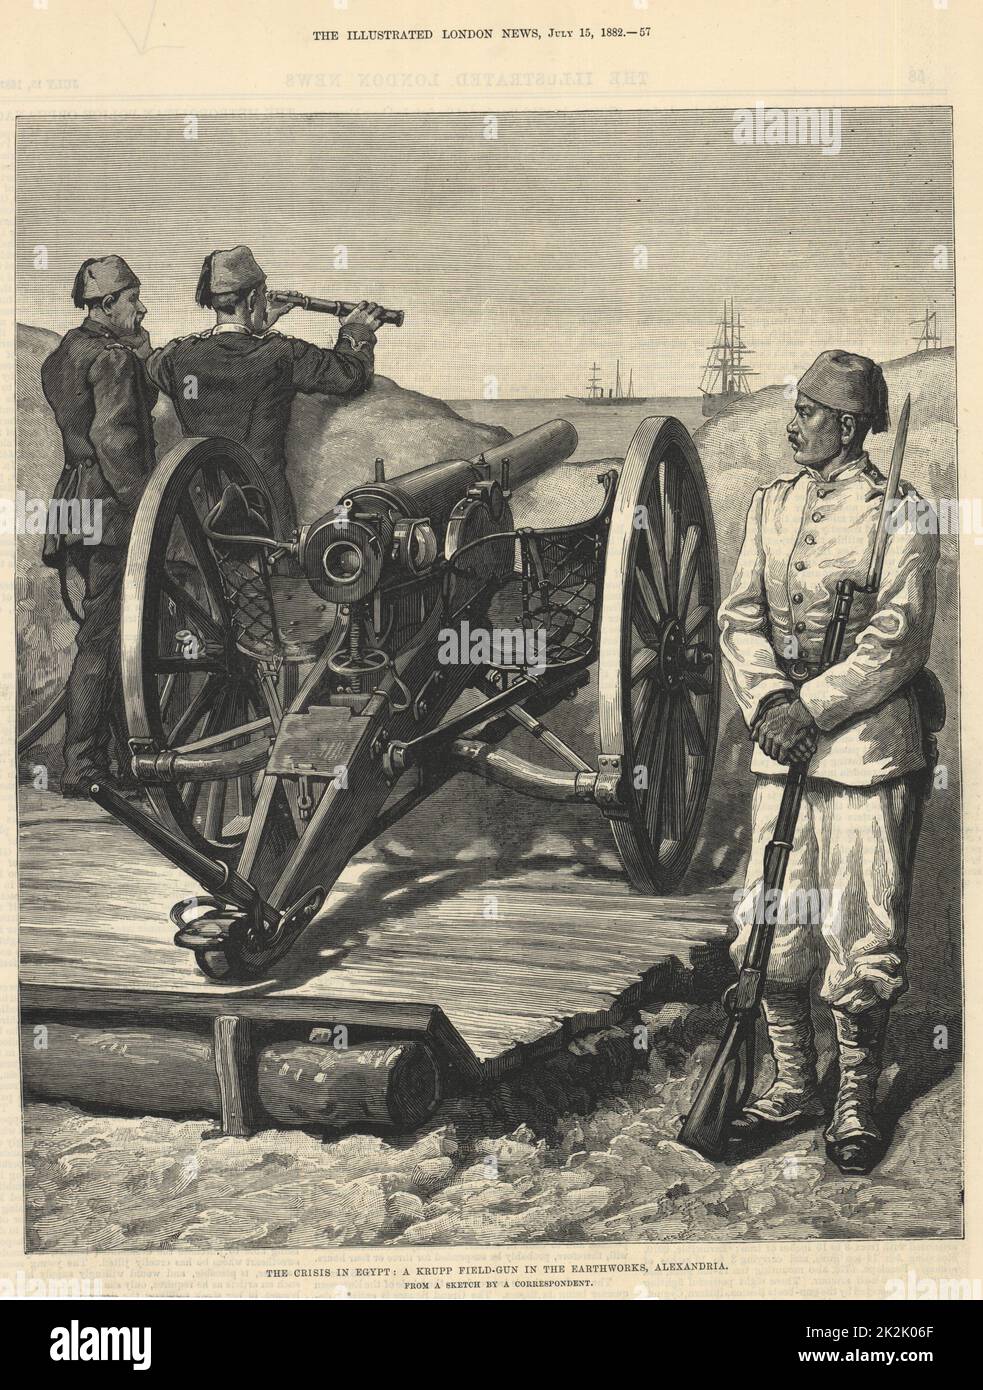 War in Egypt, 1882. During unrest in 1881 and 1882 the Egyptian Army had built forts to protect Alexandria. Anxious for the safety of the Suez Canal, after a number of warnings, the British Fleet bombarded Alexandria on 11 July 1882. A Krupp field gun in position in defence of Alexandria. Stock Photo